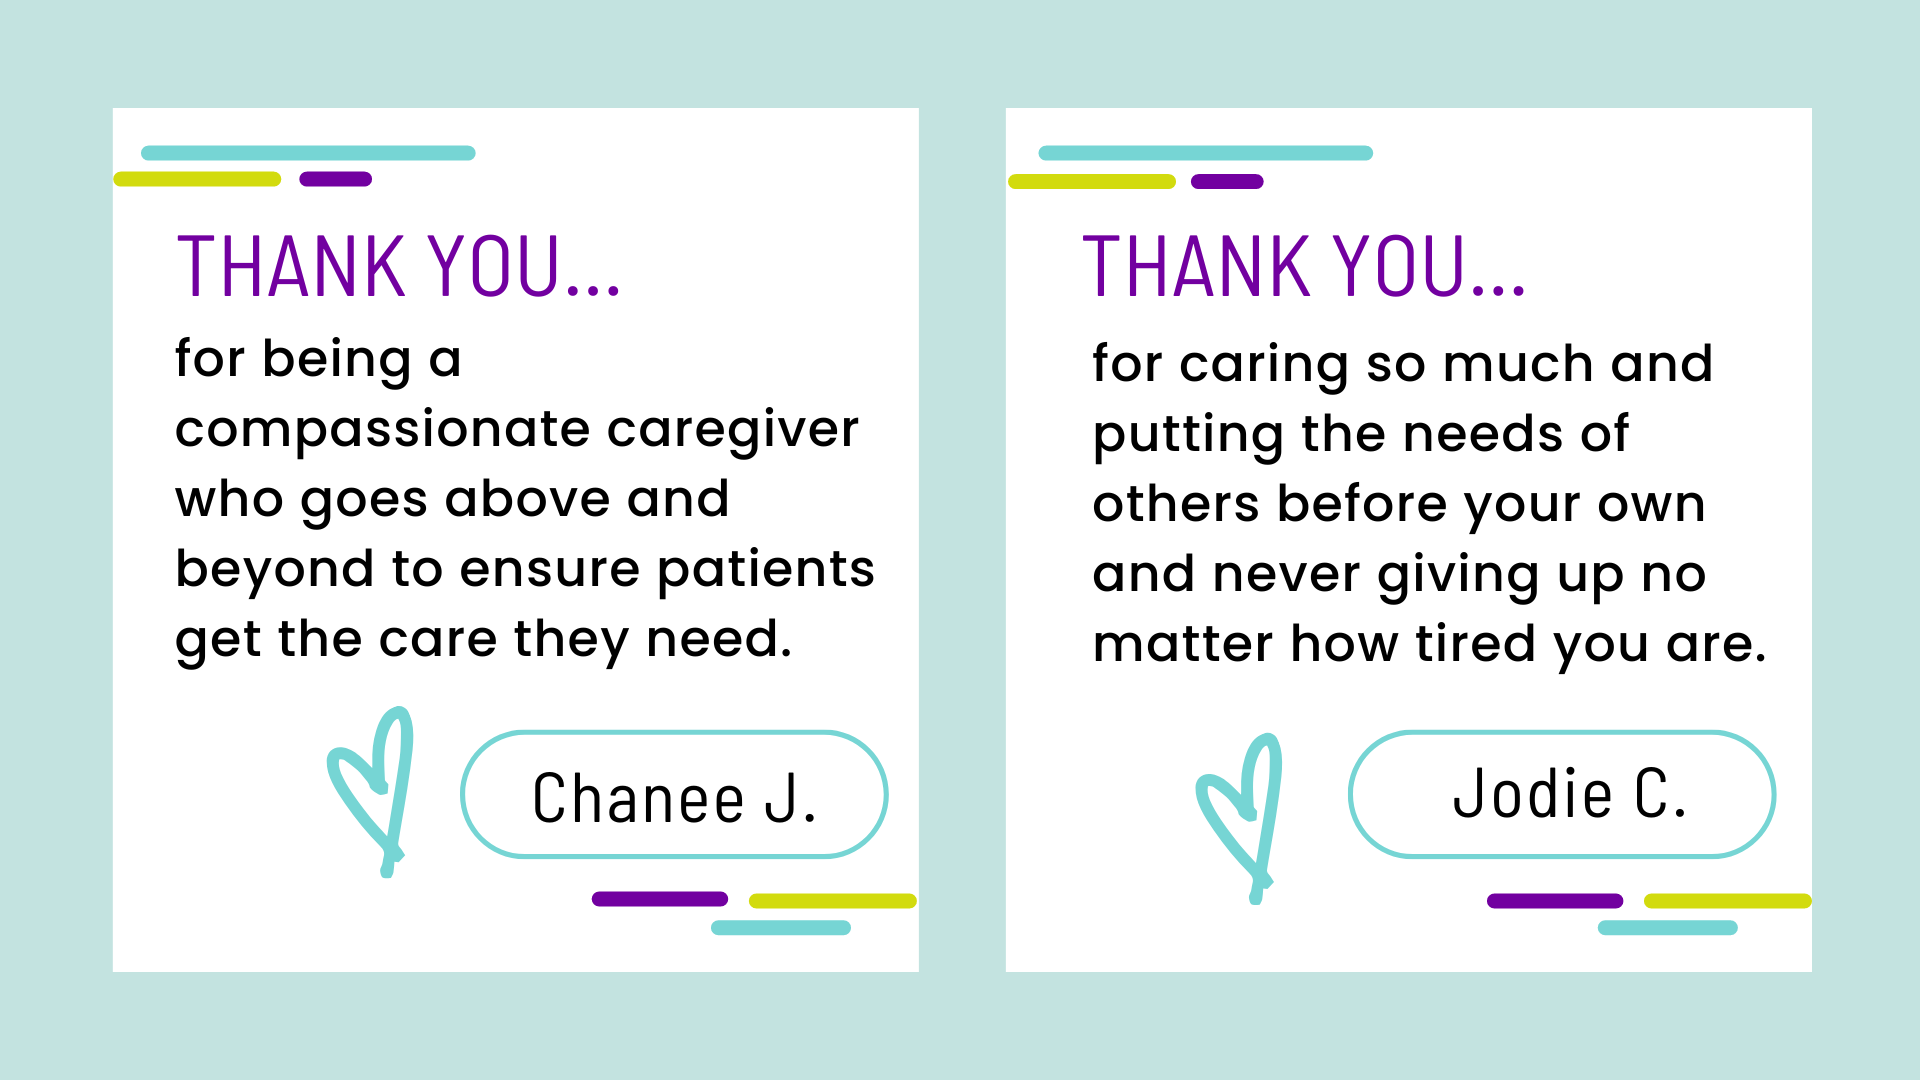 Two CNAs, Chanee and Jodie, wrote thank-you notes to themselves in honor of CNA Week.